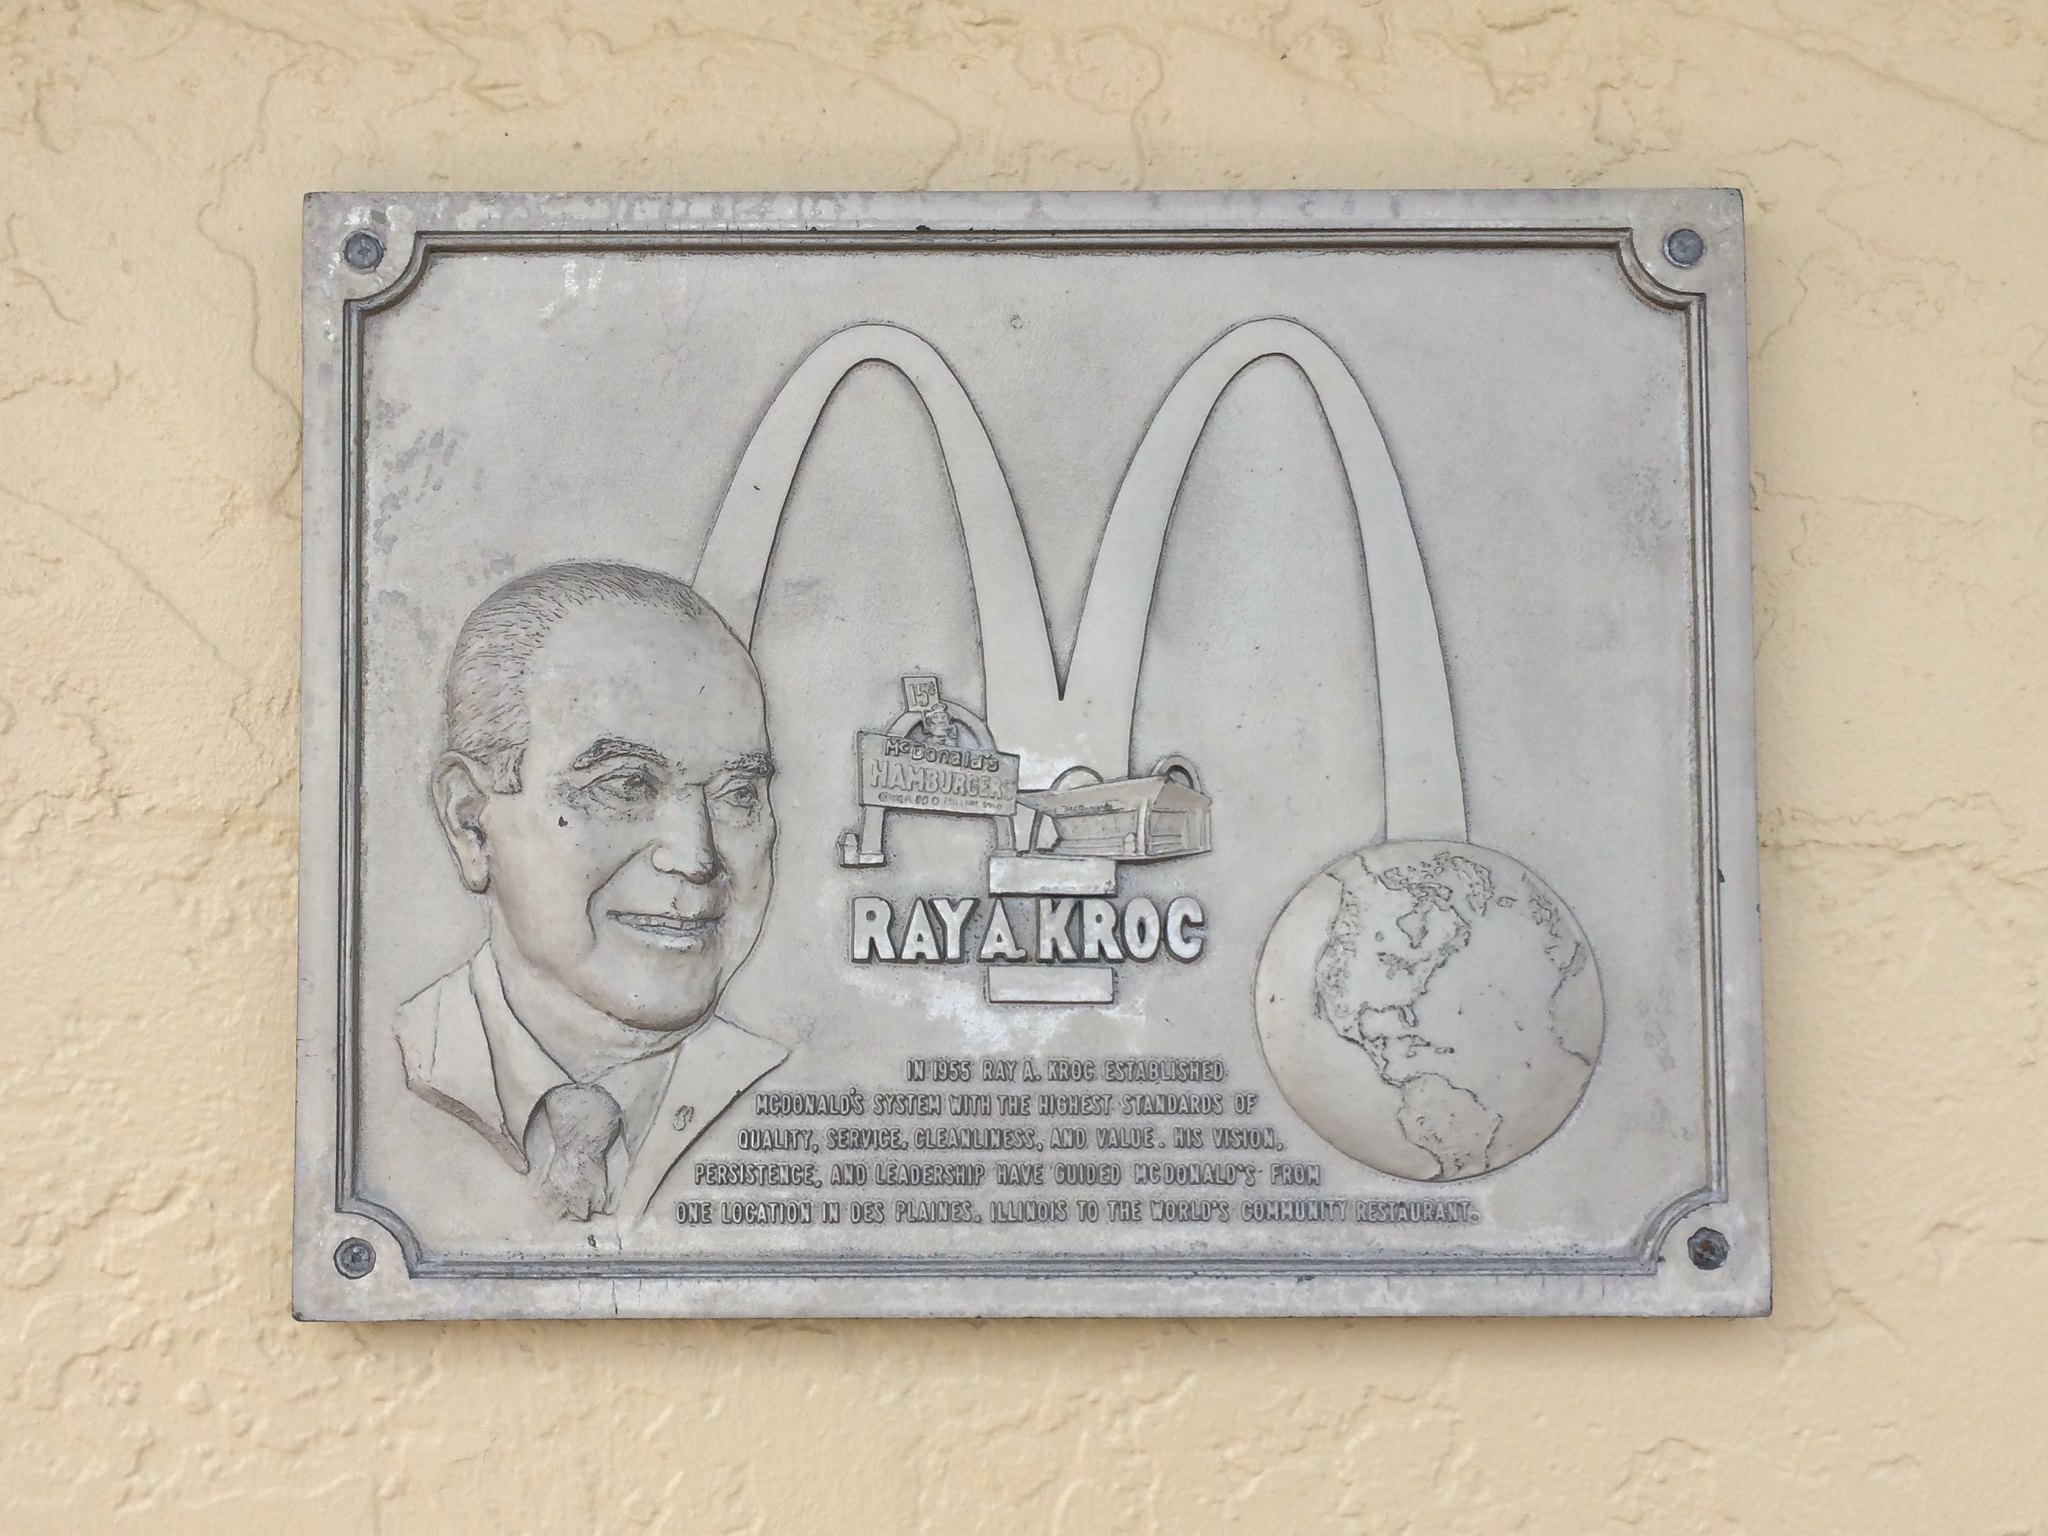 50 Ray Kroc Facts About the Man Behind McDonald's Success